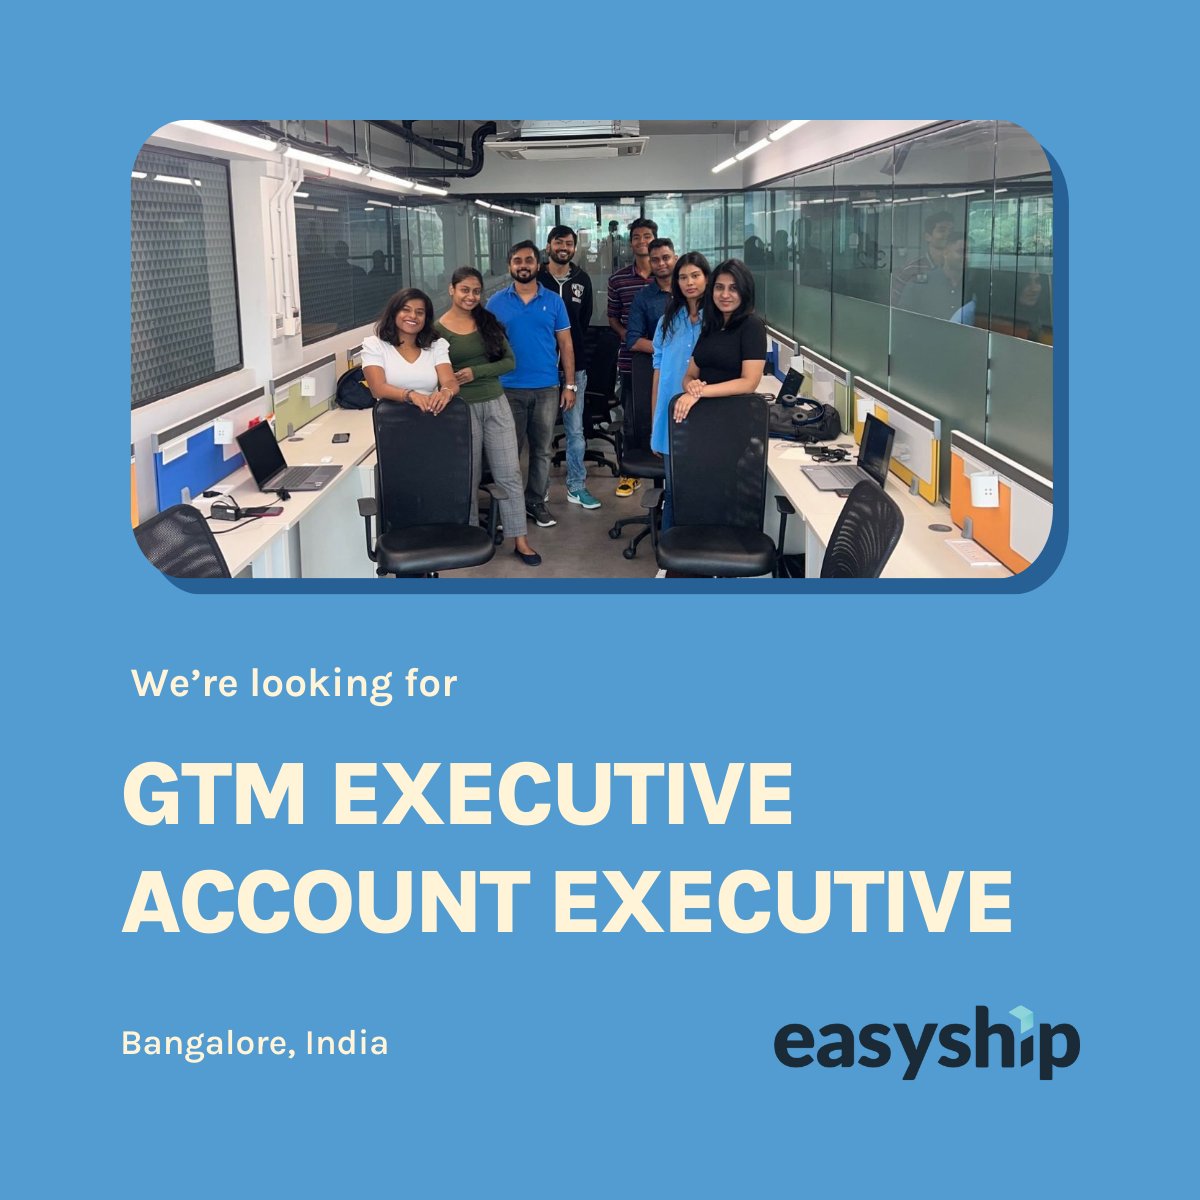 Join the #Easyship team in Bangalore!🚀
👉 GTM Executive: Drive new business opportunities and manage customer relationships: tinyurl.com/4wf8rdn2
👉 Account Executive: Identify new leads while providing high-level information on our shipping solutions: tinyurl.com/ycx9ekvk